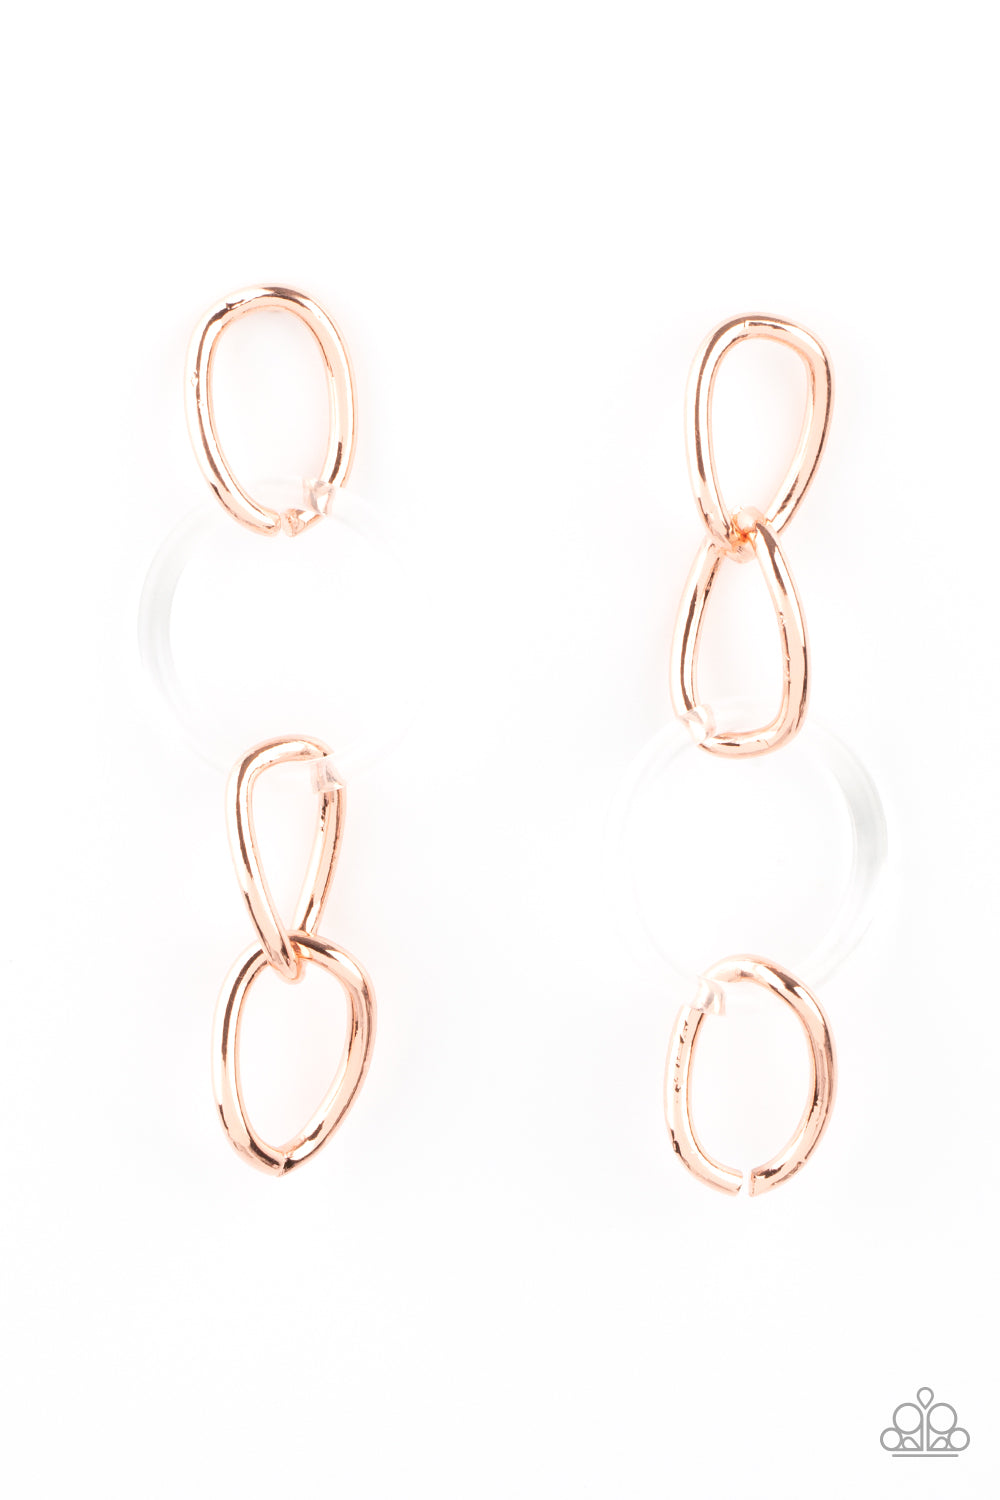 five-dollar-jewelry-talk-in-circles-copper-post earrings-paparazzi-accessories